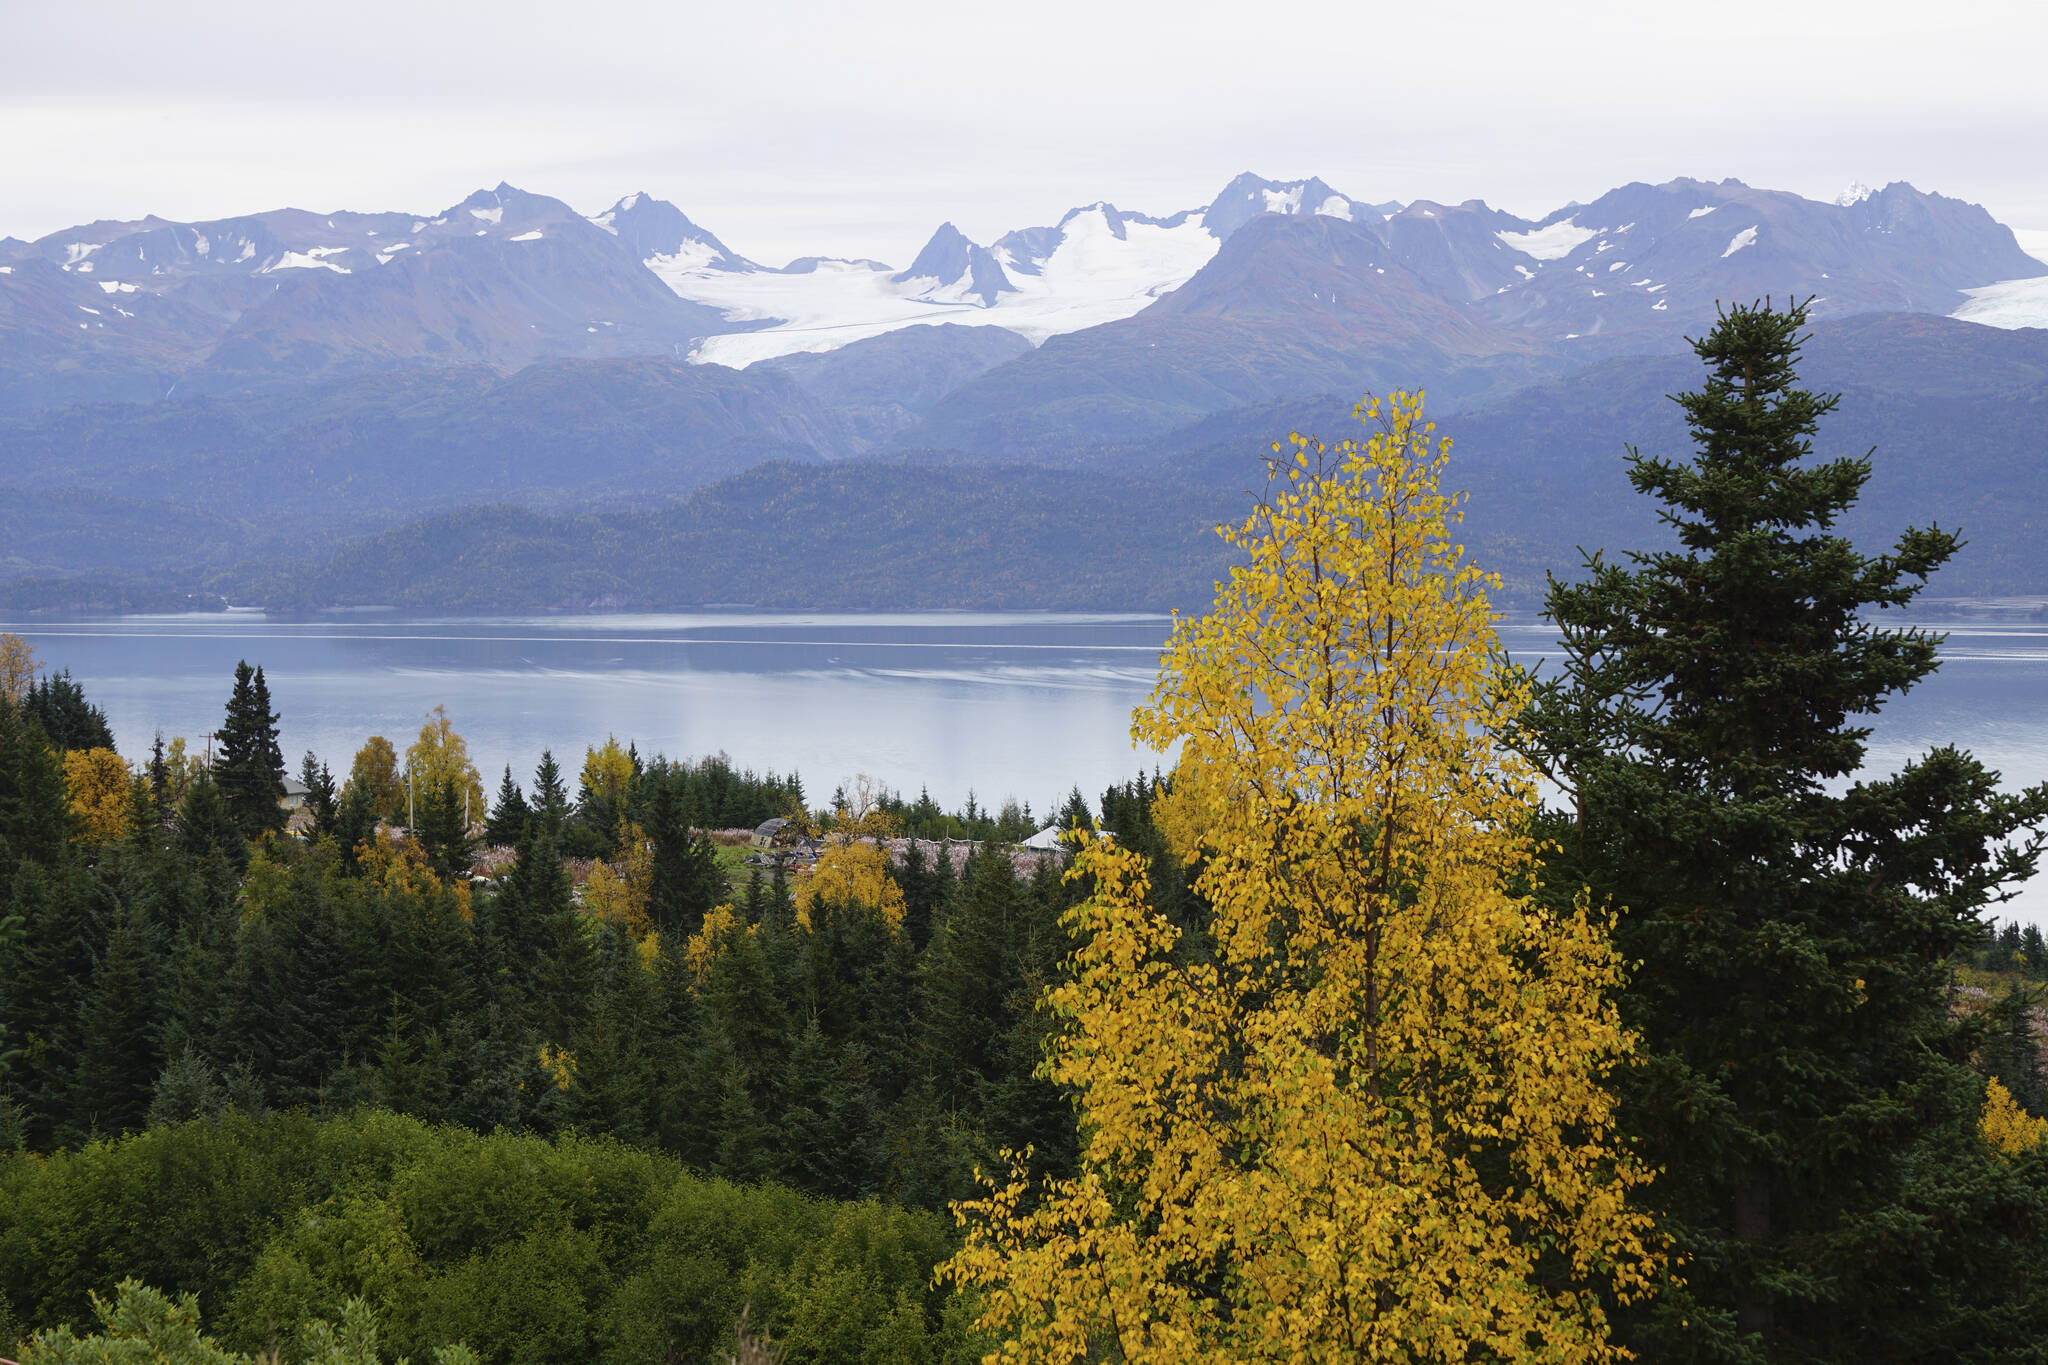 Birch trees have begun to turn yellow in this view of the Maria Road area and across Kachemak Bay as seen on Sunday, Sept. 18, 2022, from Old East End Road near McNeil Canyon, Alaska. (Photo by Michael Armstrong/Homer News)